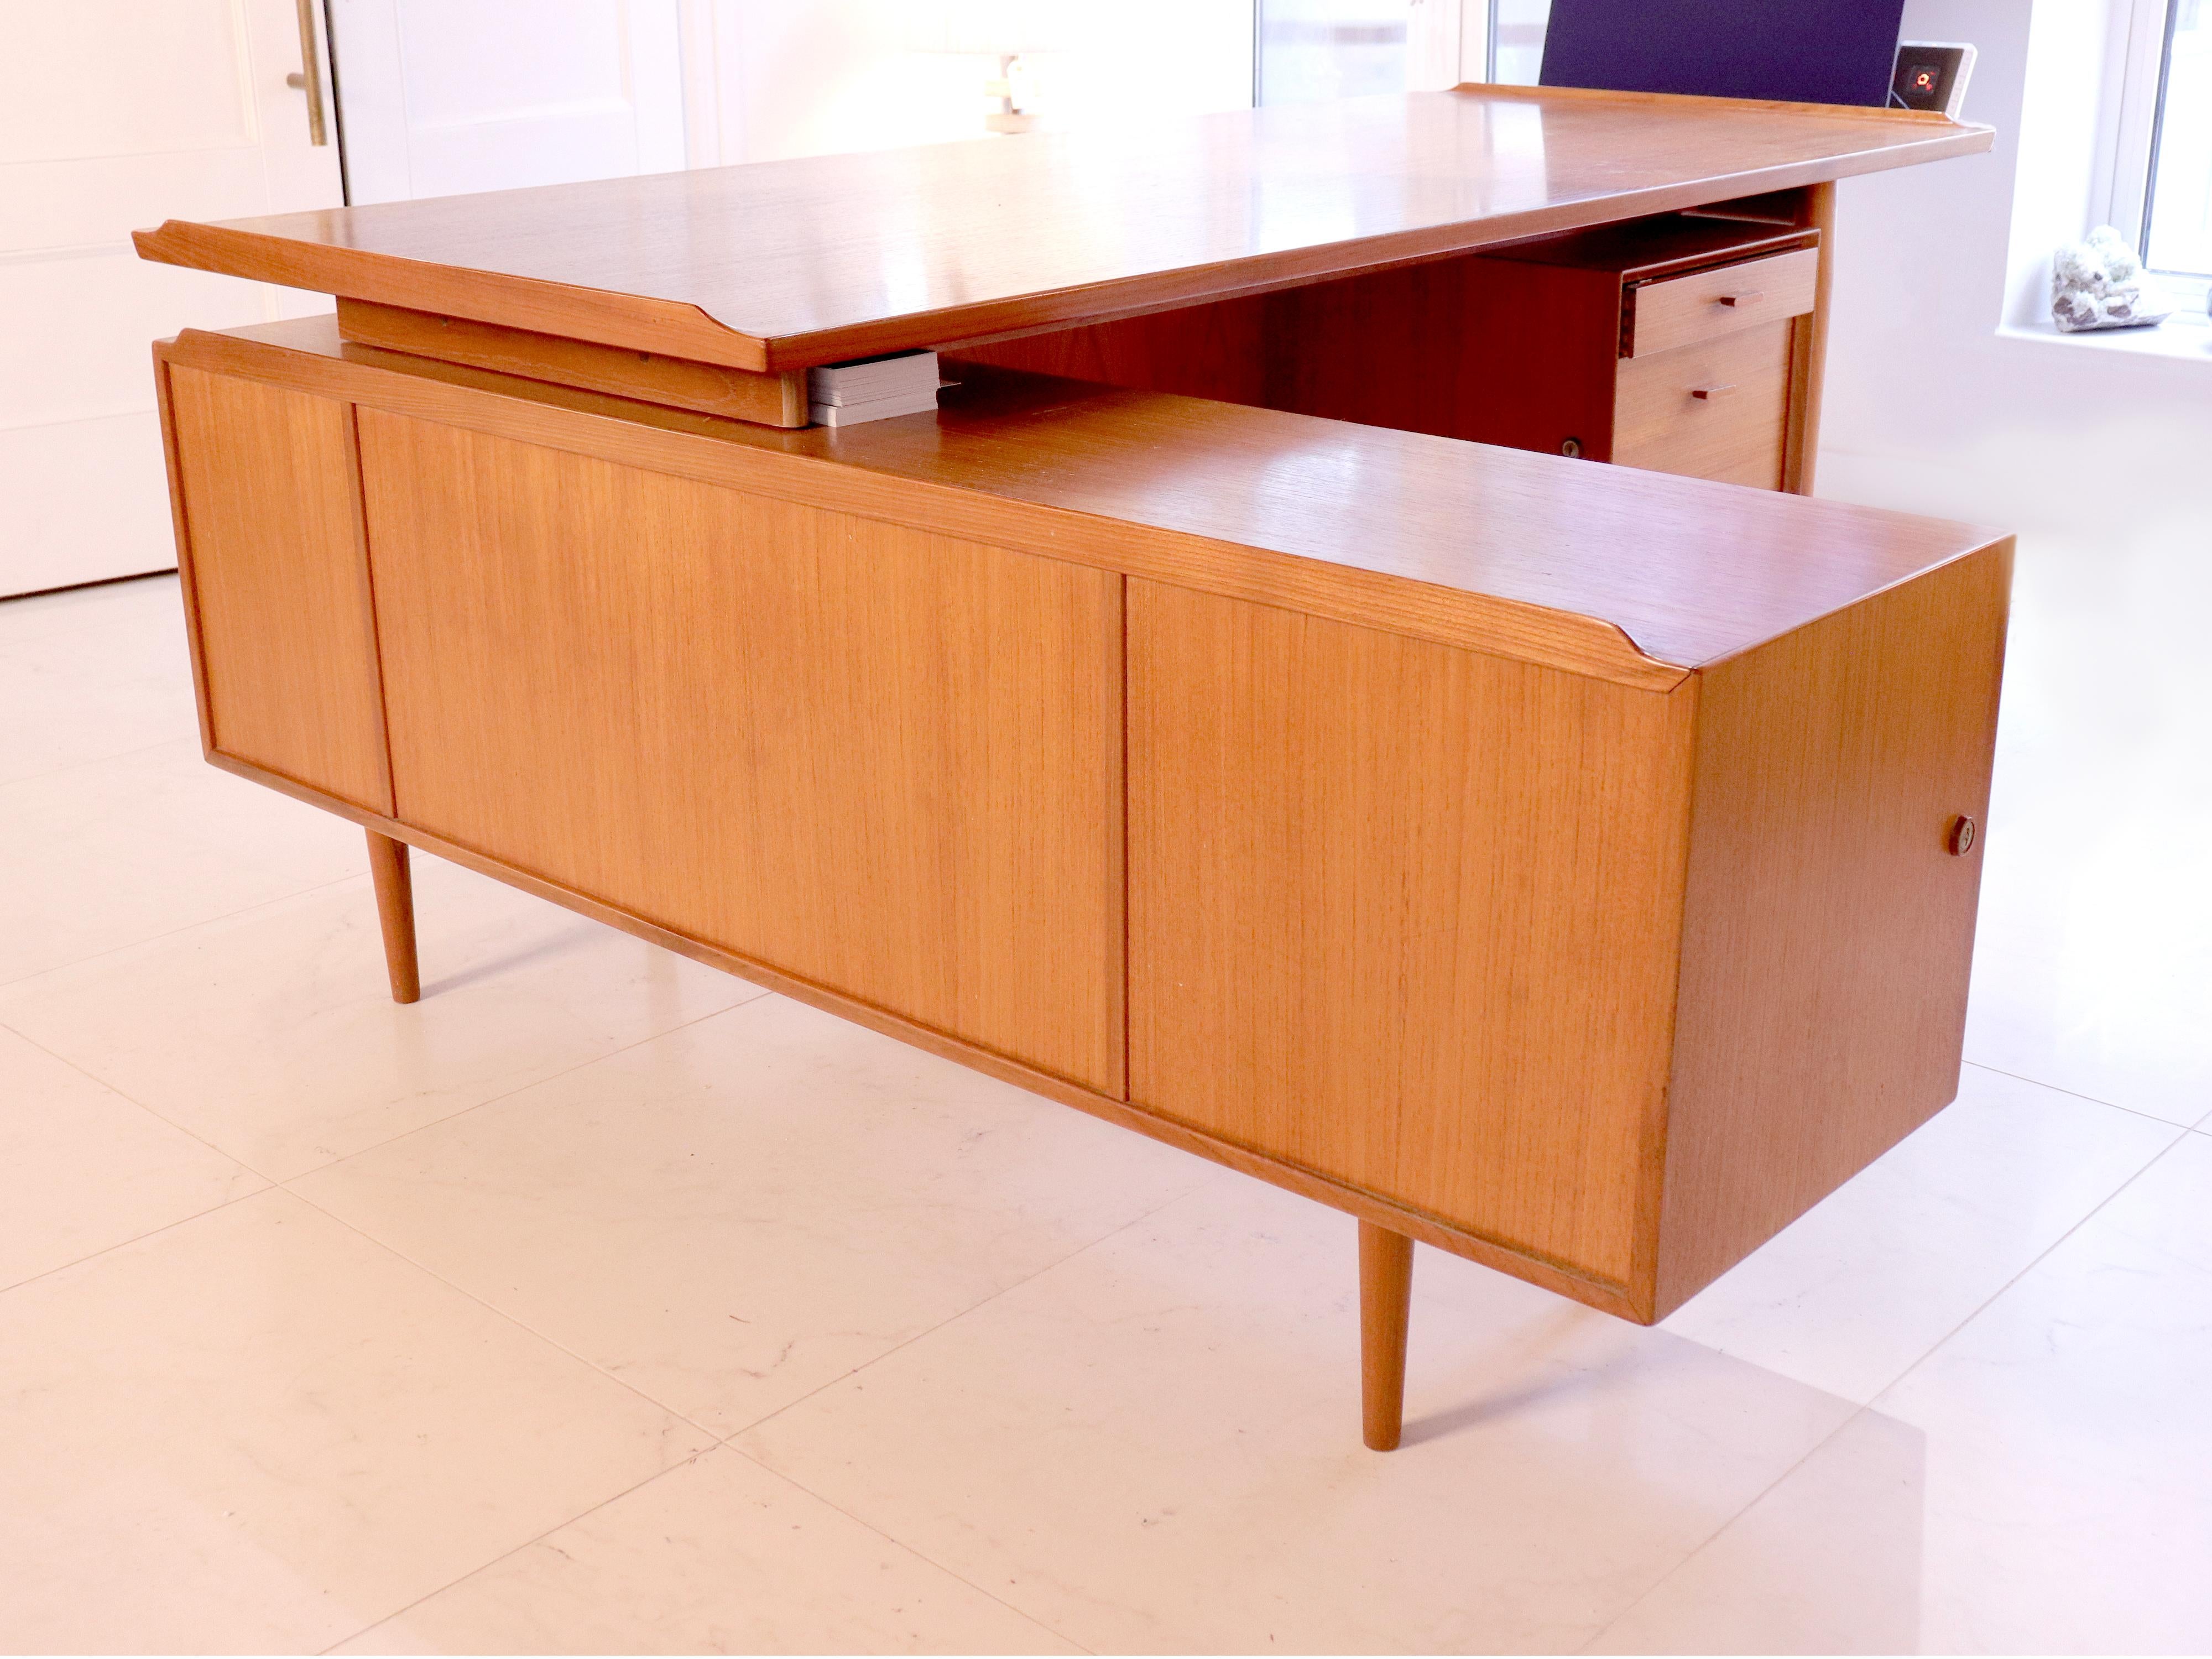 Executive Writing desk in Teak wood by Arne Vodder for Sibast, Model 509, 1960s
This right angle teakwood desk is perfect for a dynamic workspace with ample space on the desk top and lots of storage.
The solid teak legs are slightly tapered, the